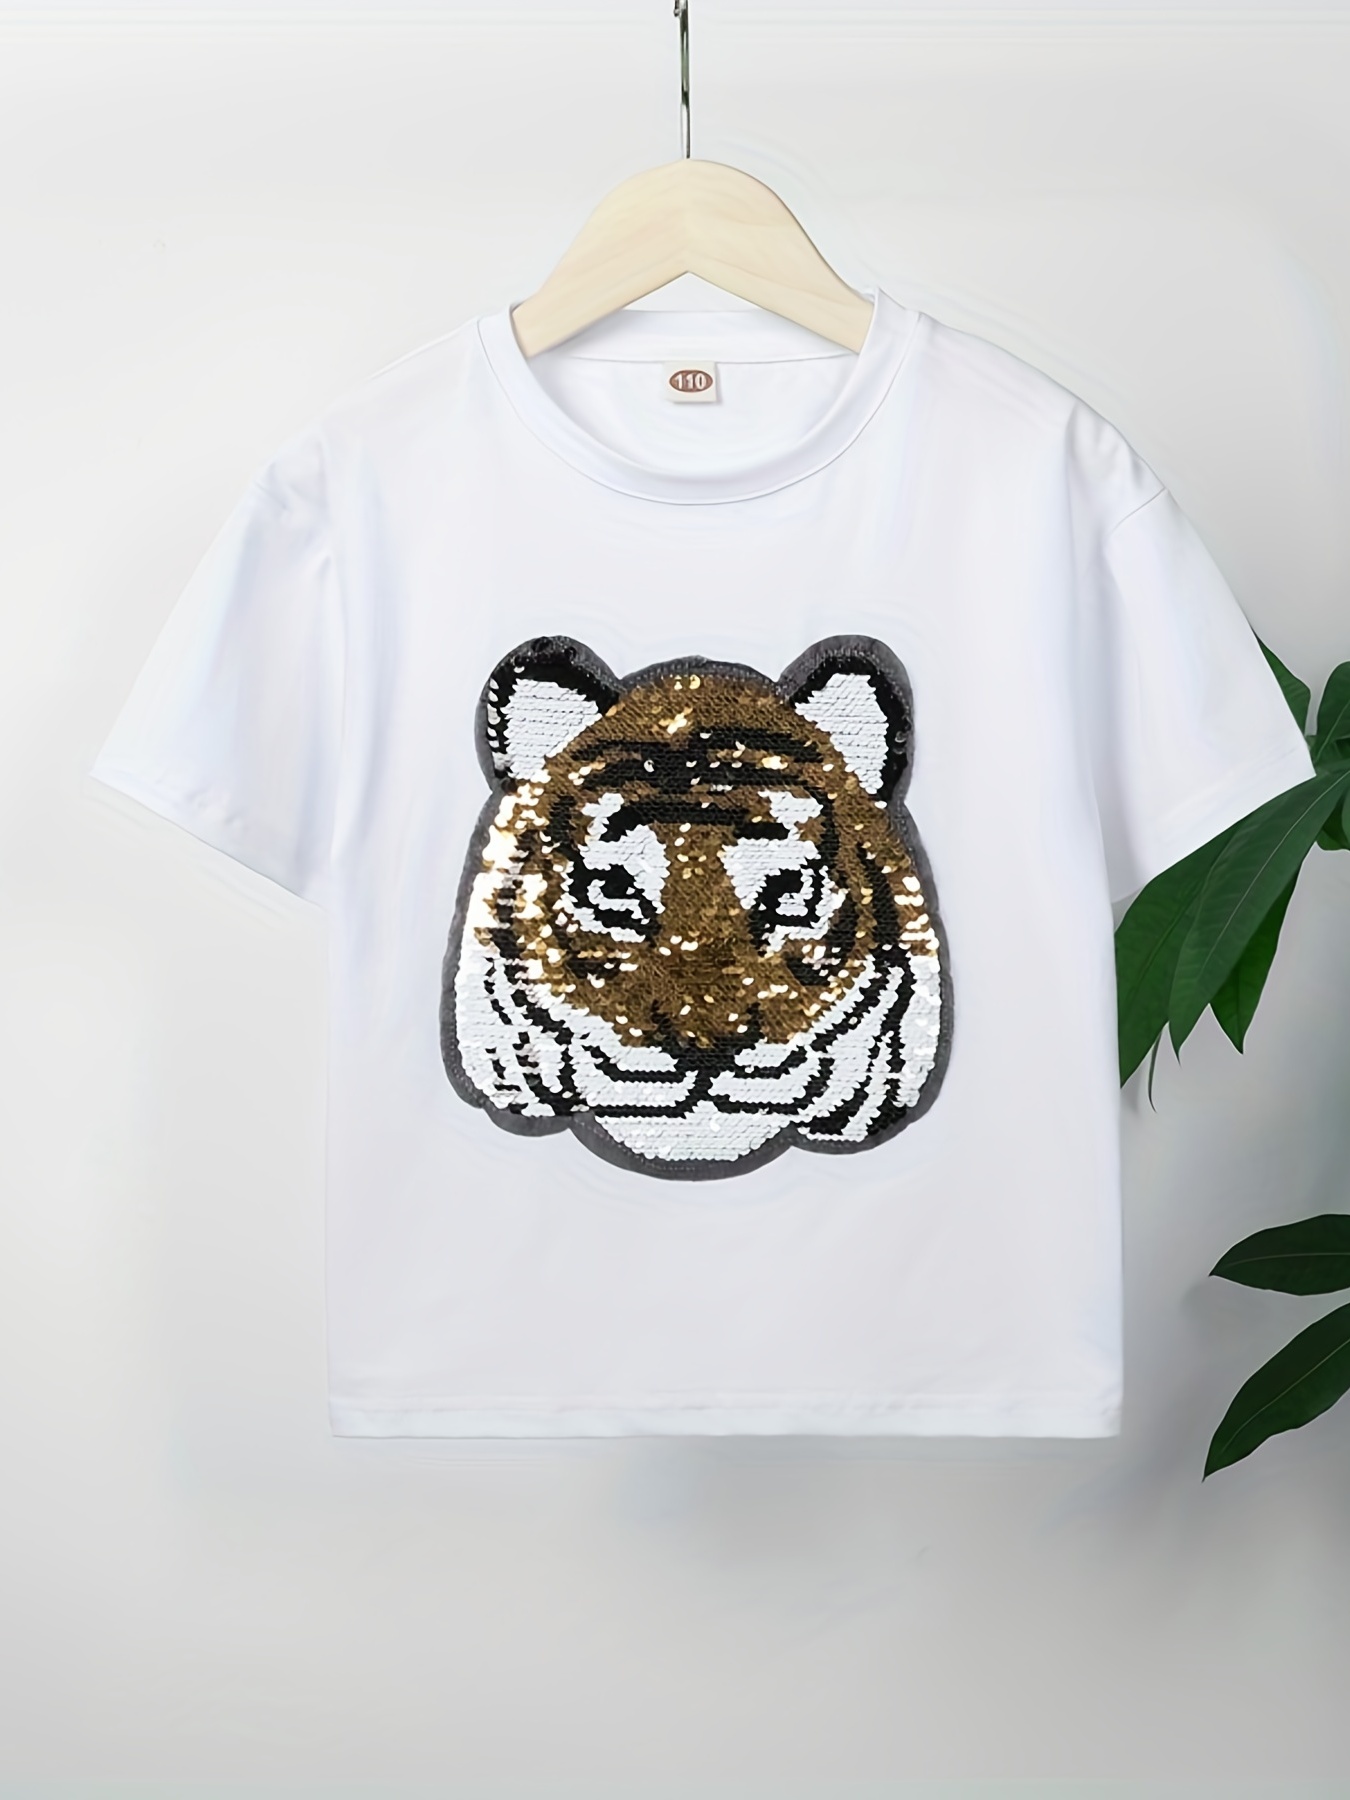 Temu 3D Tiger Print, Men's Graphic Design Crew Neck Novel T-Shirt, Casual Comfy Tees Tshirts for Summer, Men's Clothing Tops for Daily Vacation Resorts